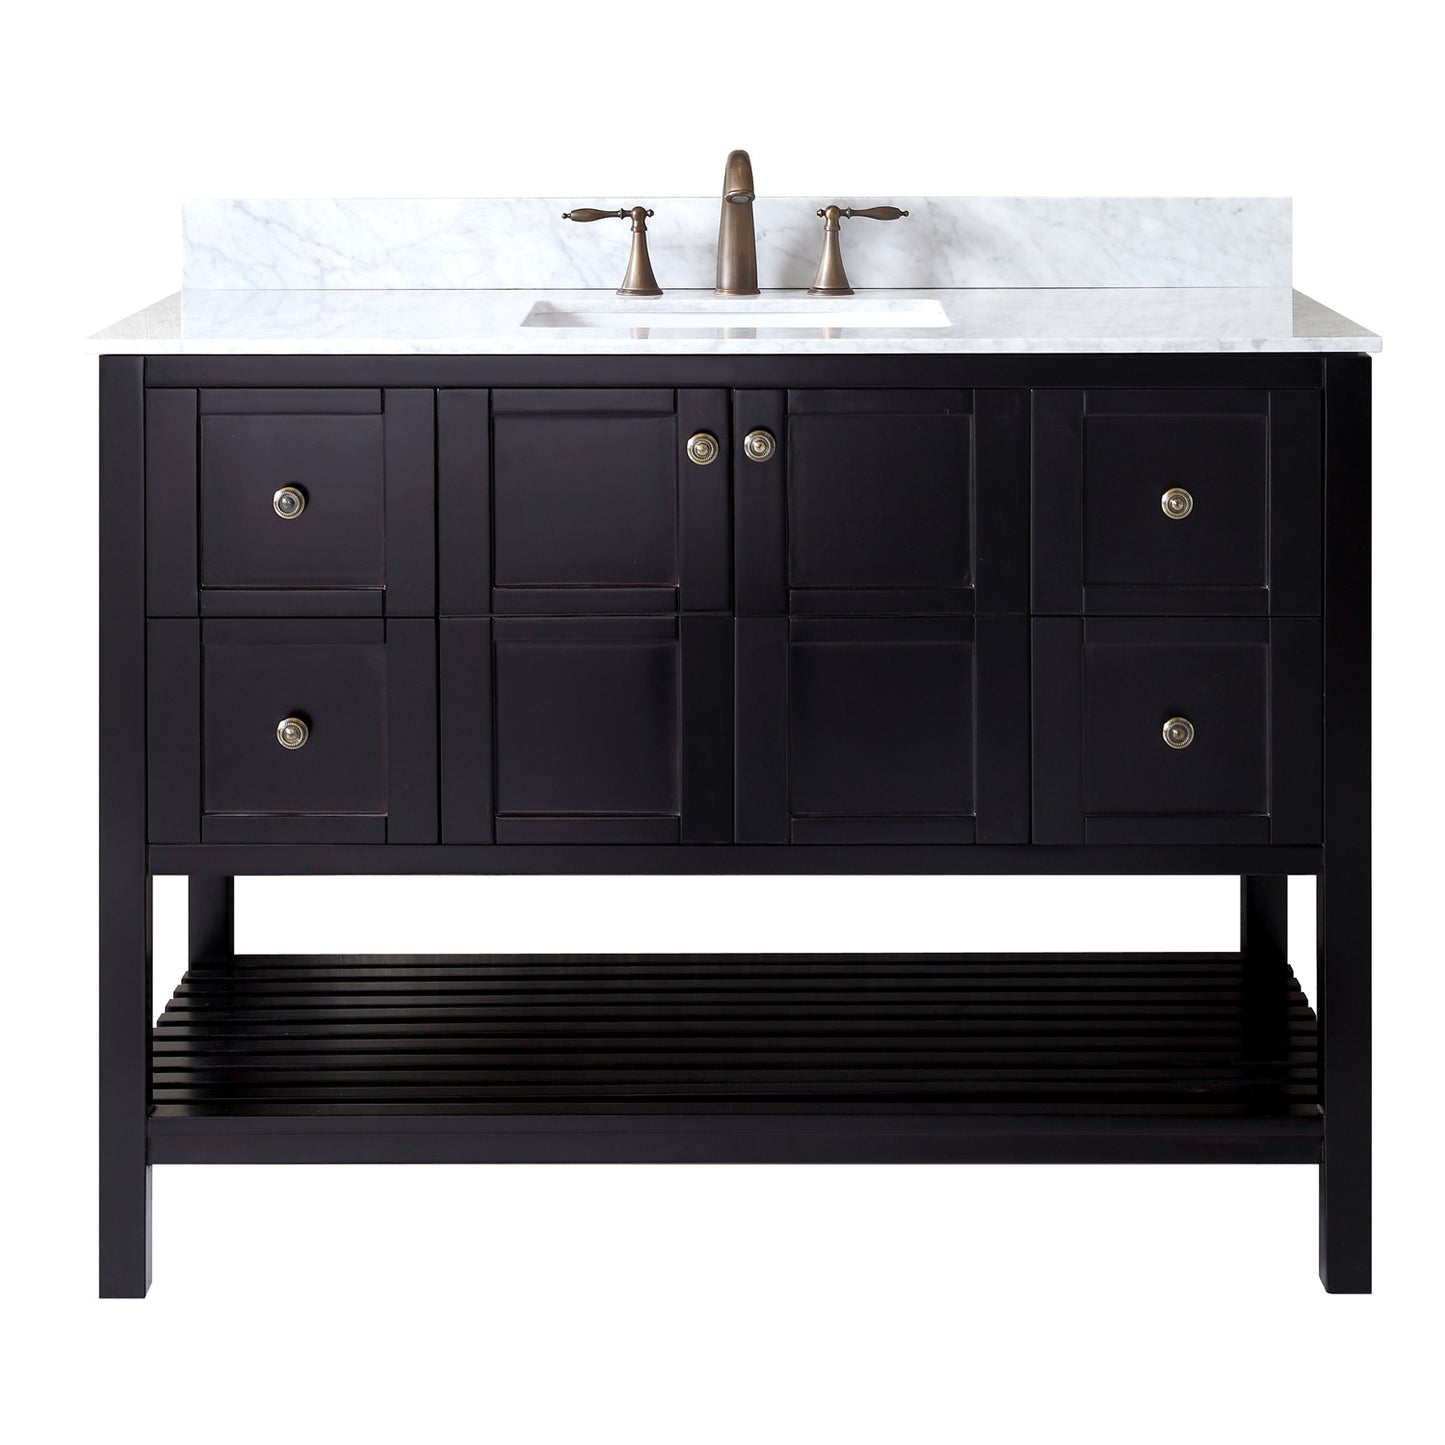 Virtu USA Winterfell 48" Single Bath Vanity in Espresso with Marble Top and Square Sink - Luxe Bathroom Vanities Luxury Bathroom Fixtures Bathroom Furniture